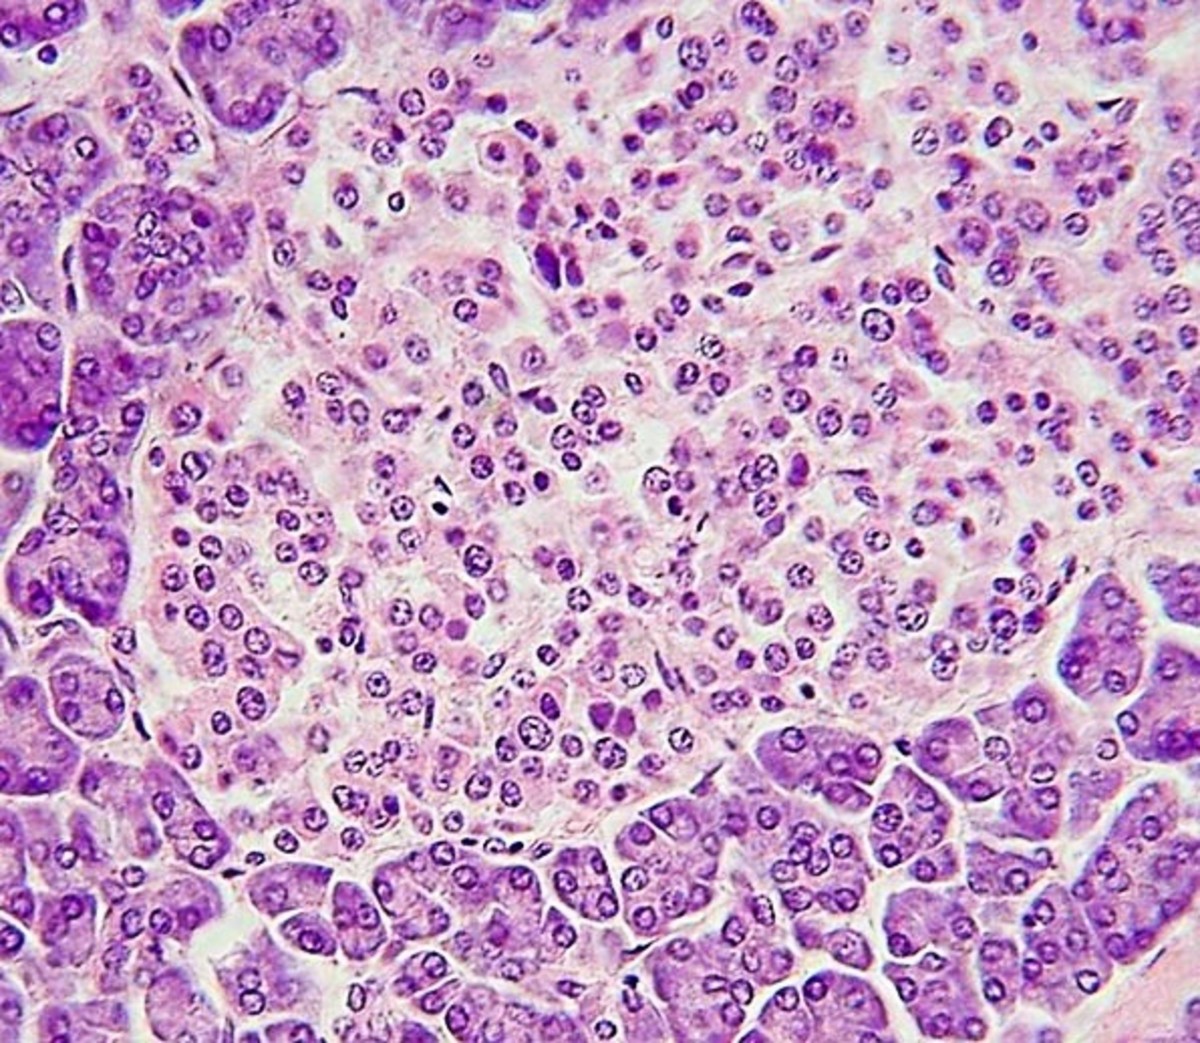 The pancreatic islet is in the middle of this stained slide. The acini surround the islet.